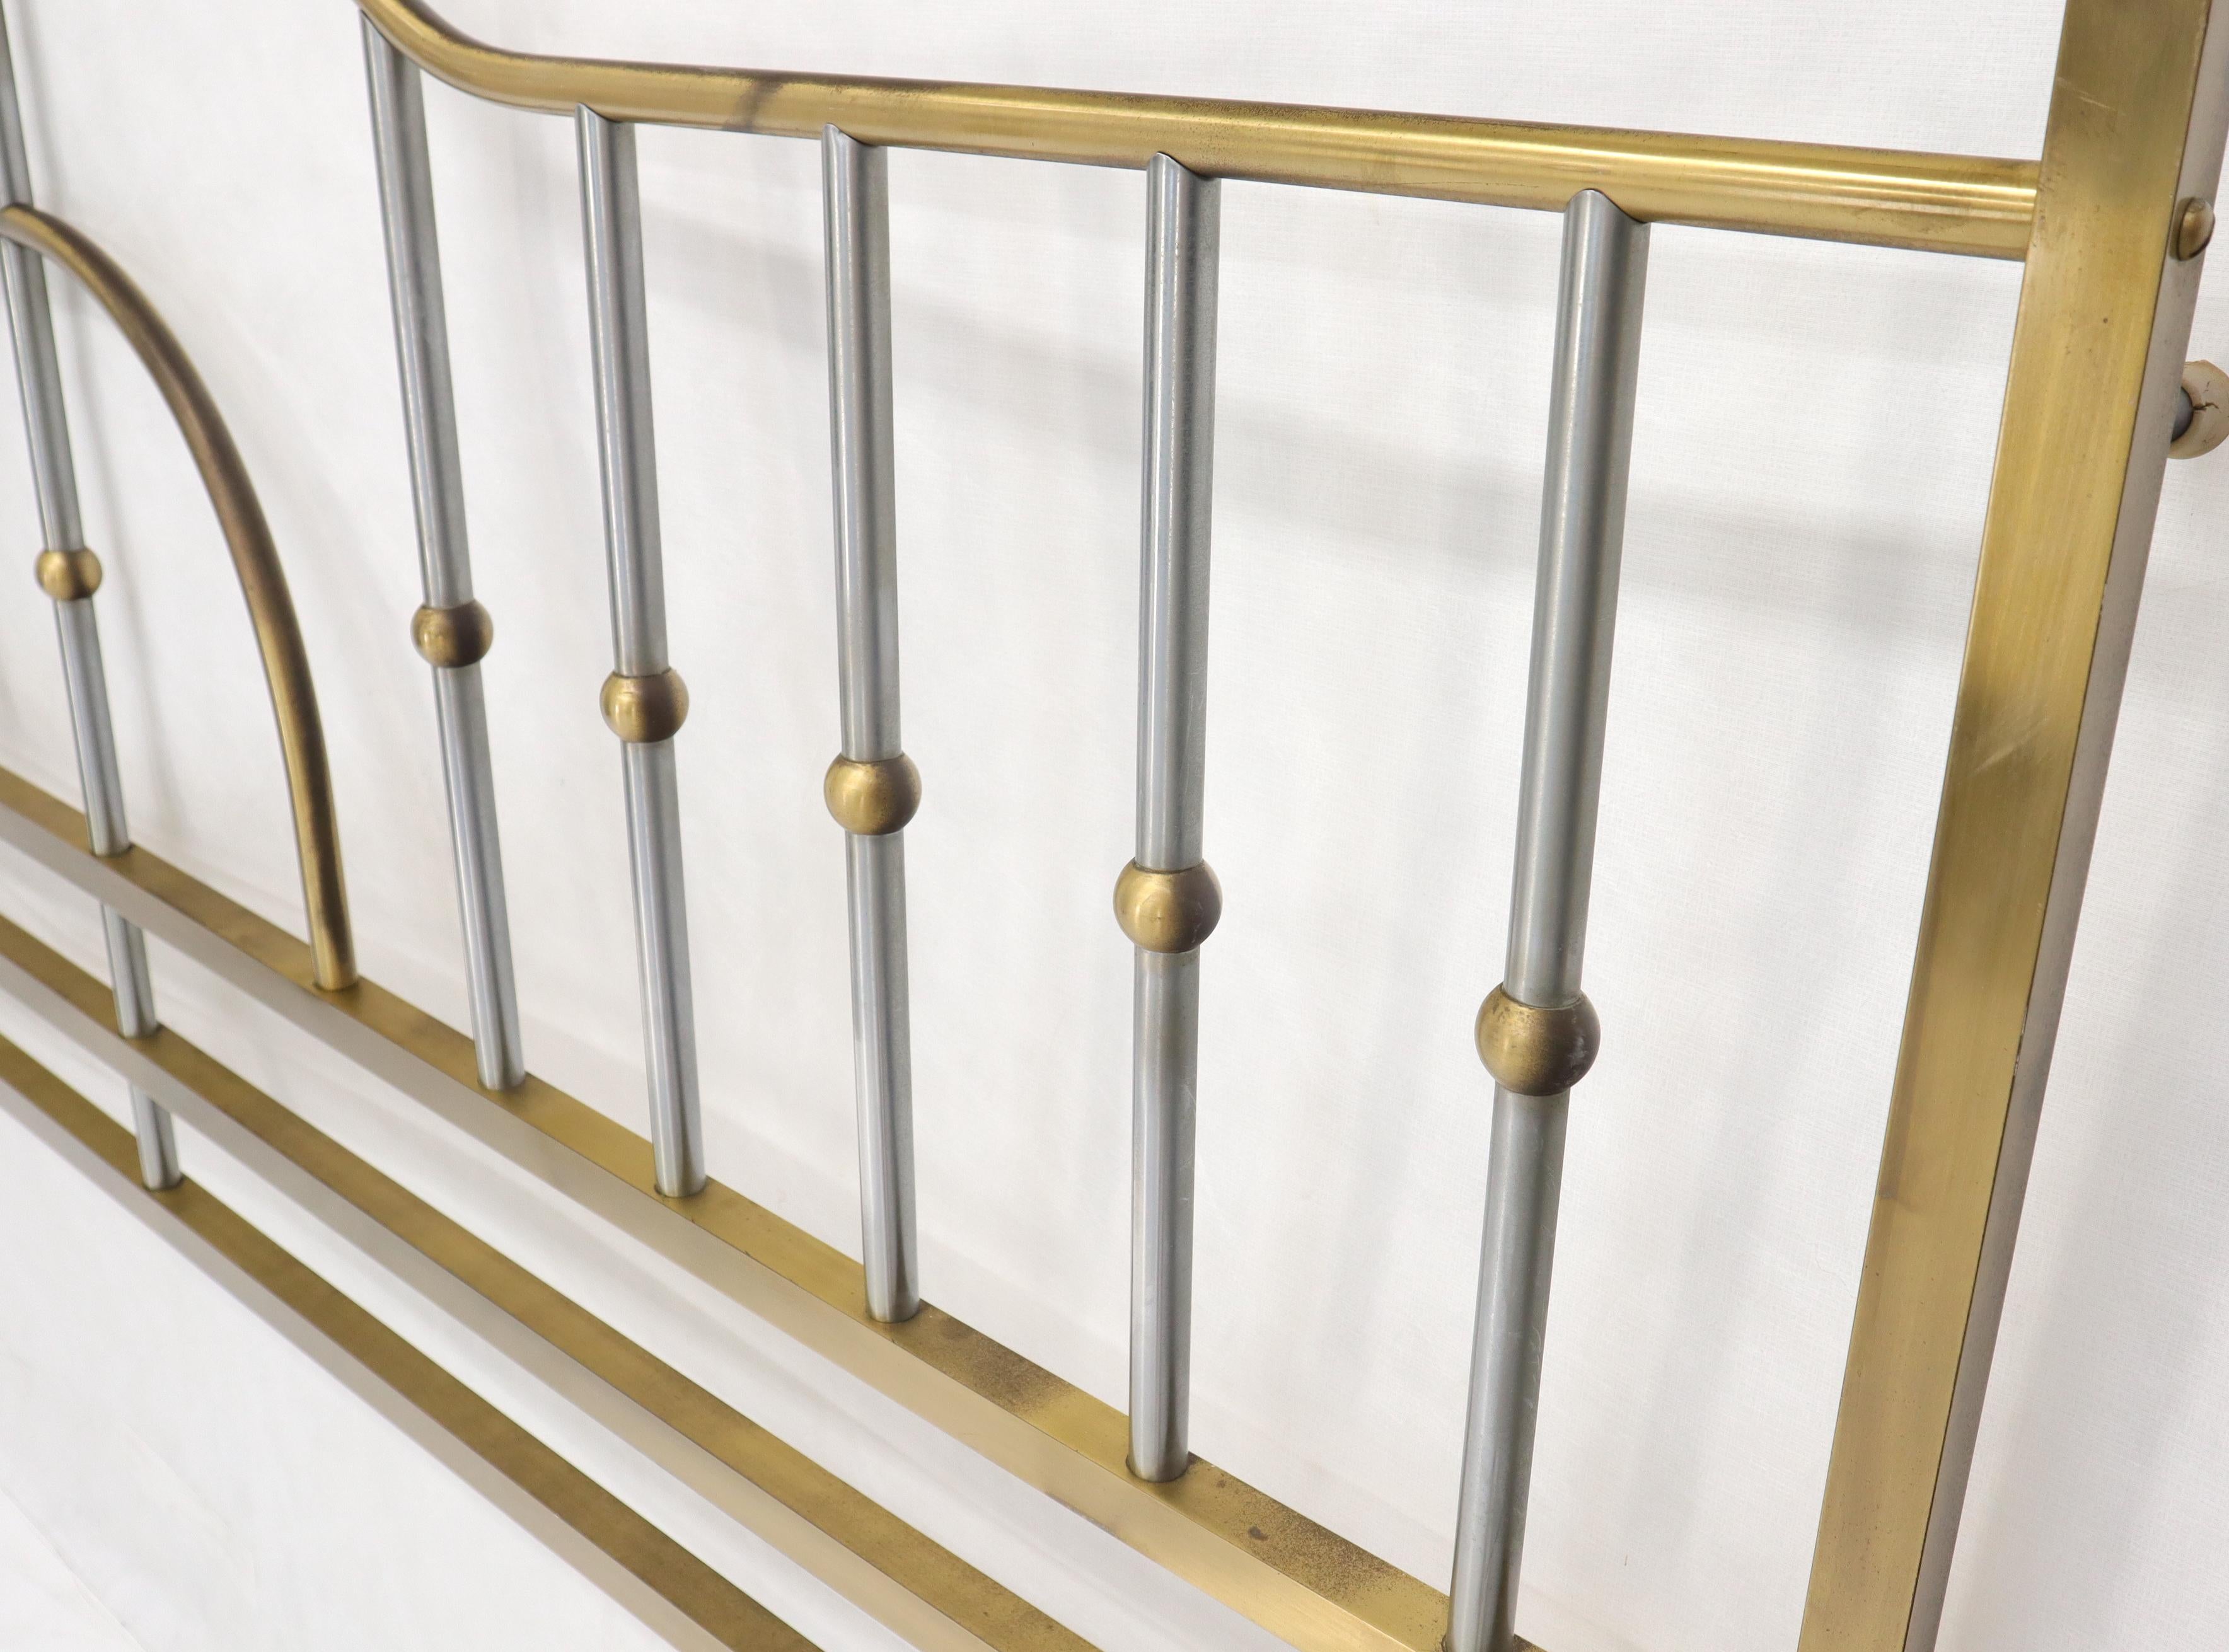 American Mid-Century Modern Brass and Chrome King Size Headboard For Sale